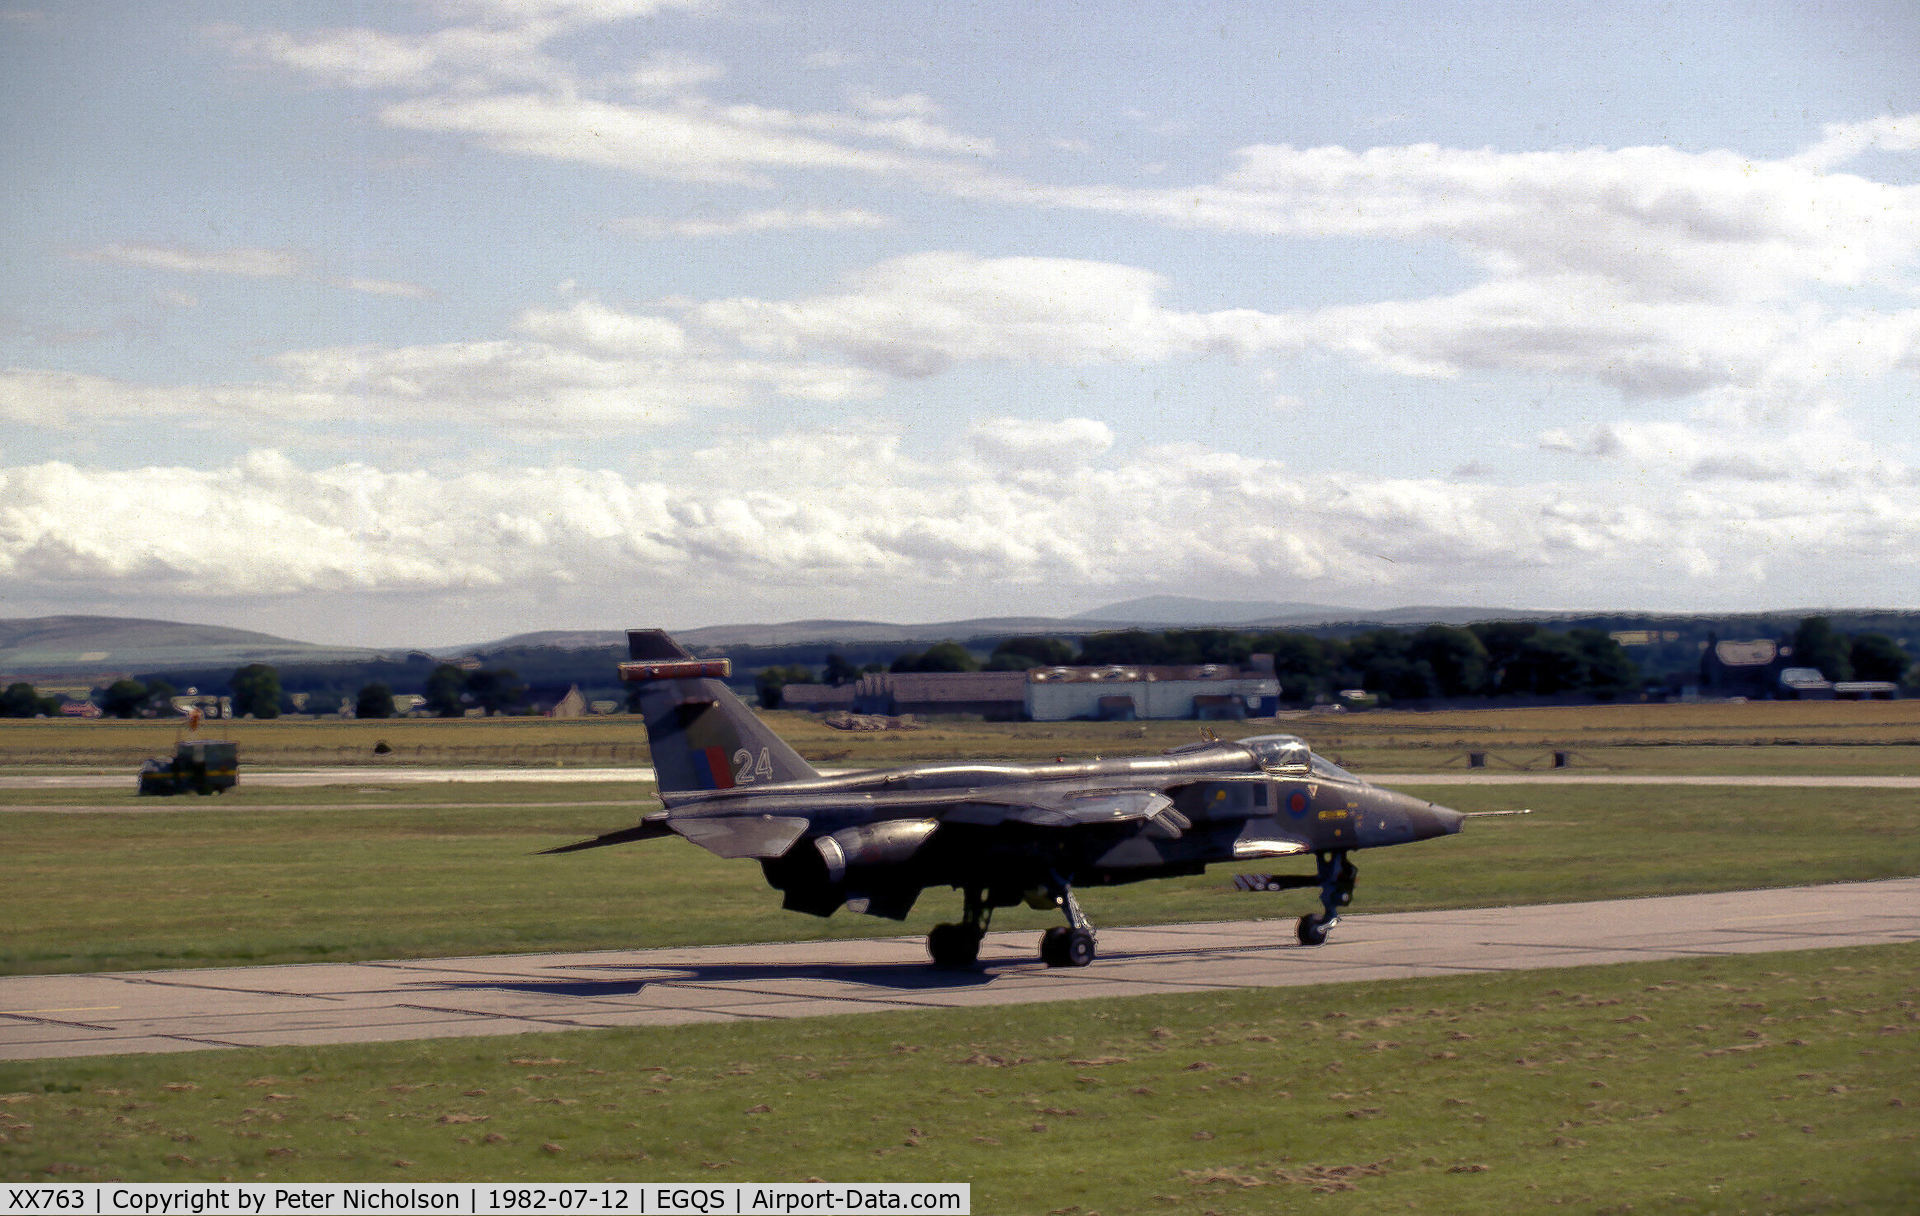 XX763, 1975 Sepecat Jaguar GR.1 C/N S.60, Jaguar GR.1 of 226 Operational Conversion Unit taxying to Runway 05 at RAF Lossiemouth in the Summer of 1982.